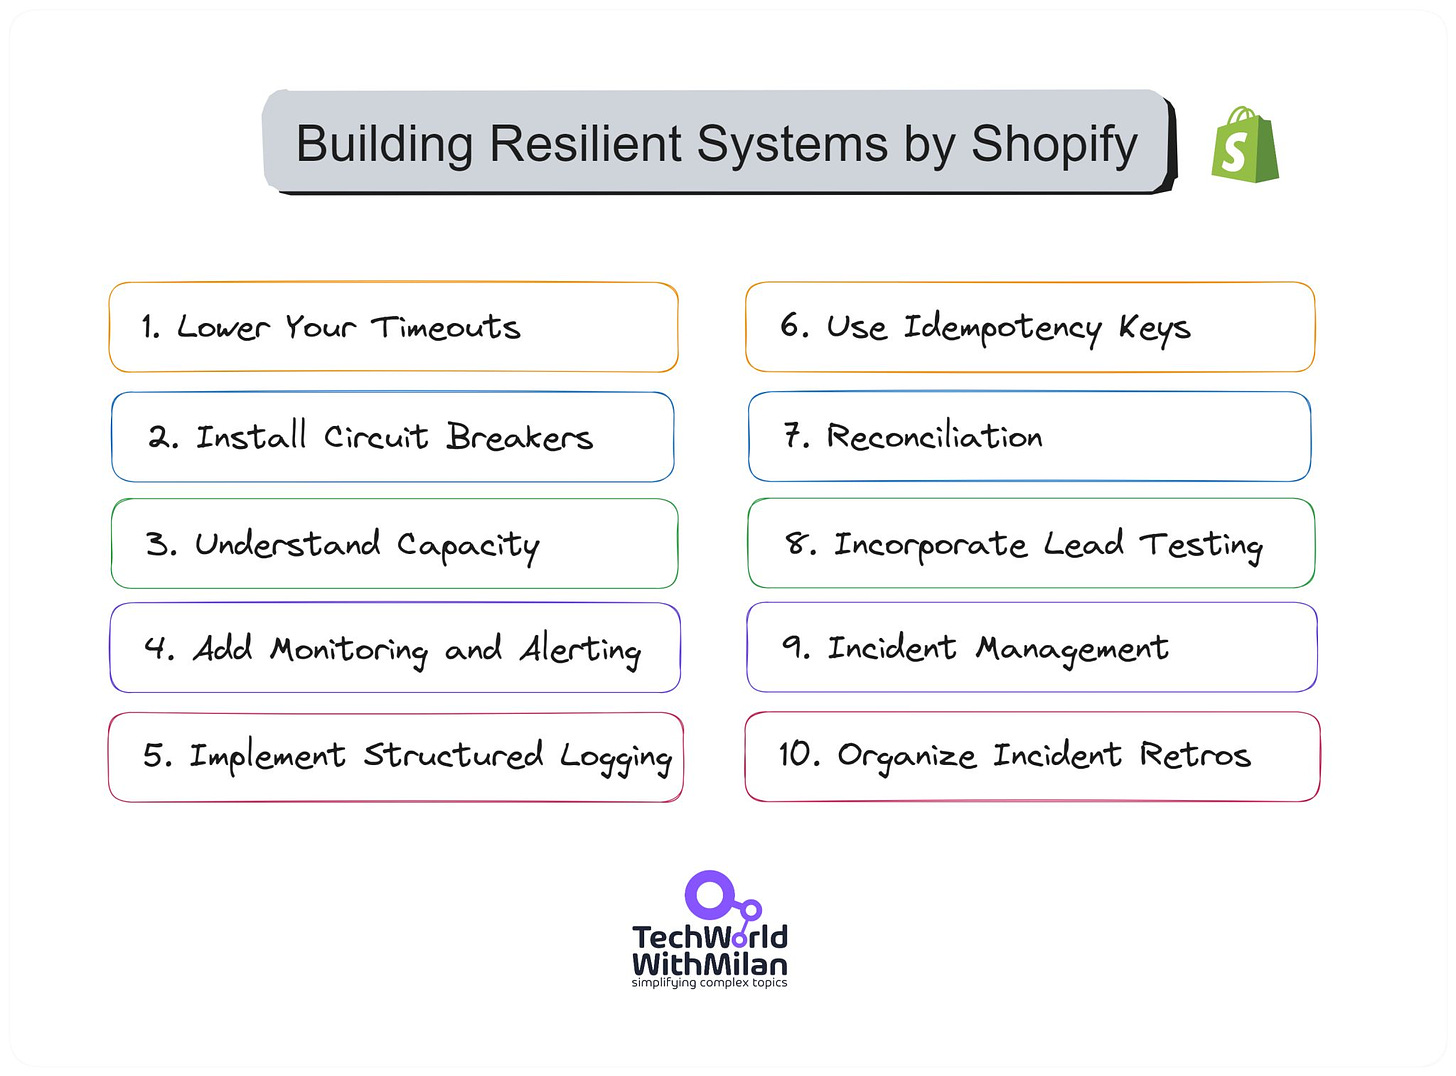 Building Resilient Systems by Shopify